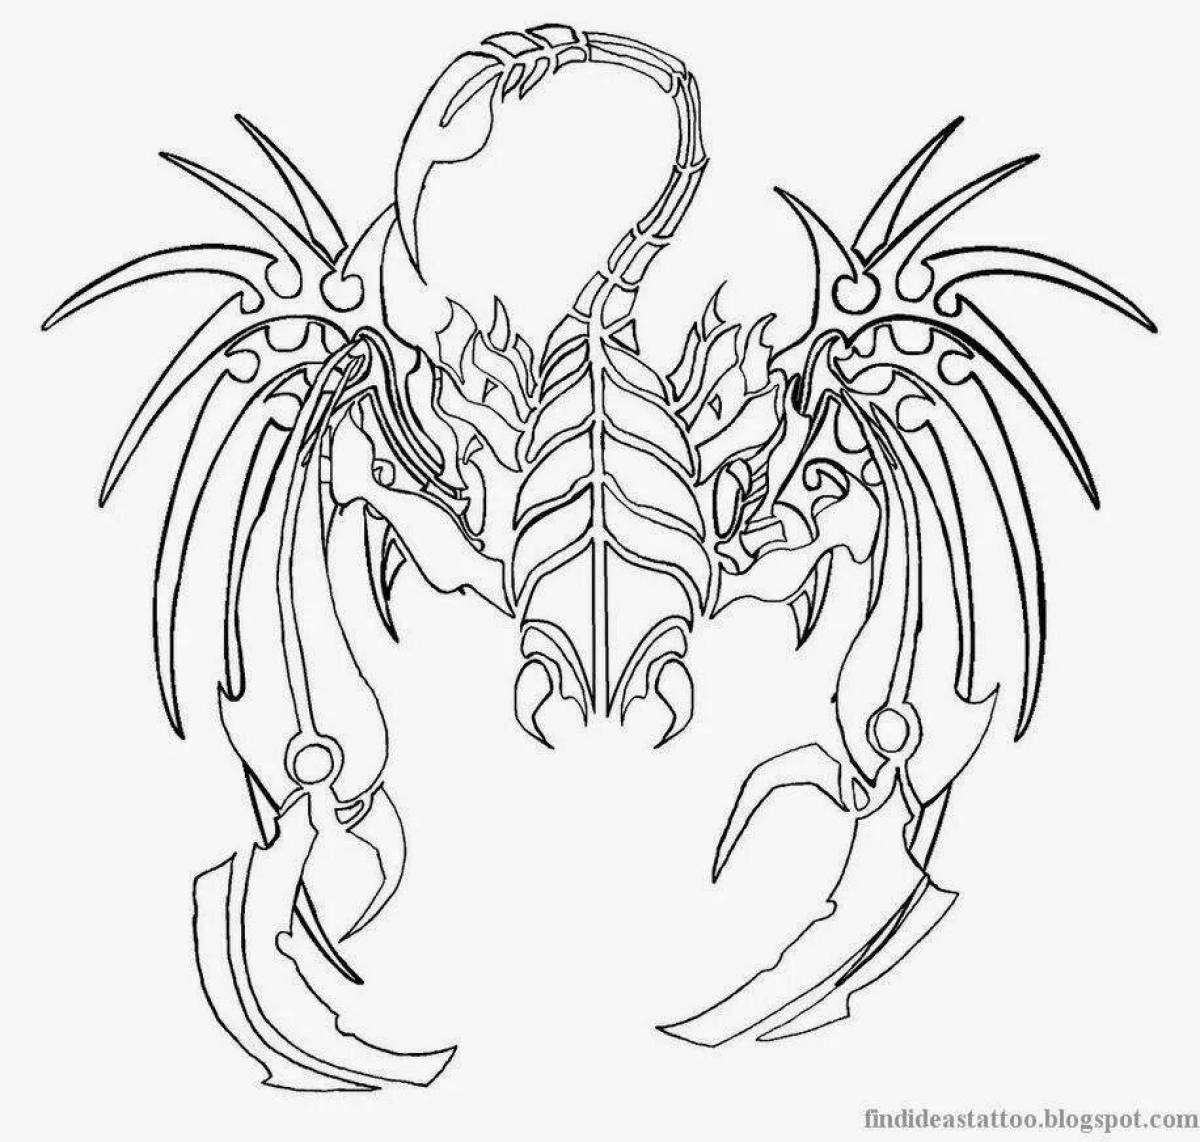 Majestic scorpion coloring page